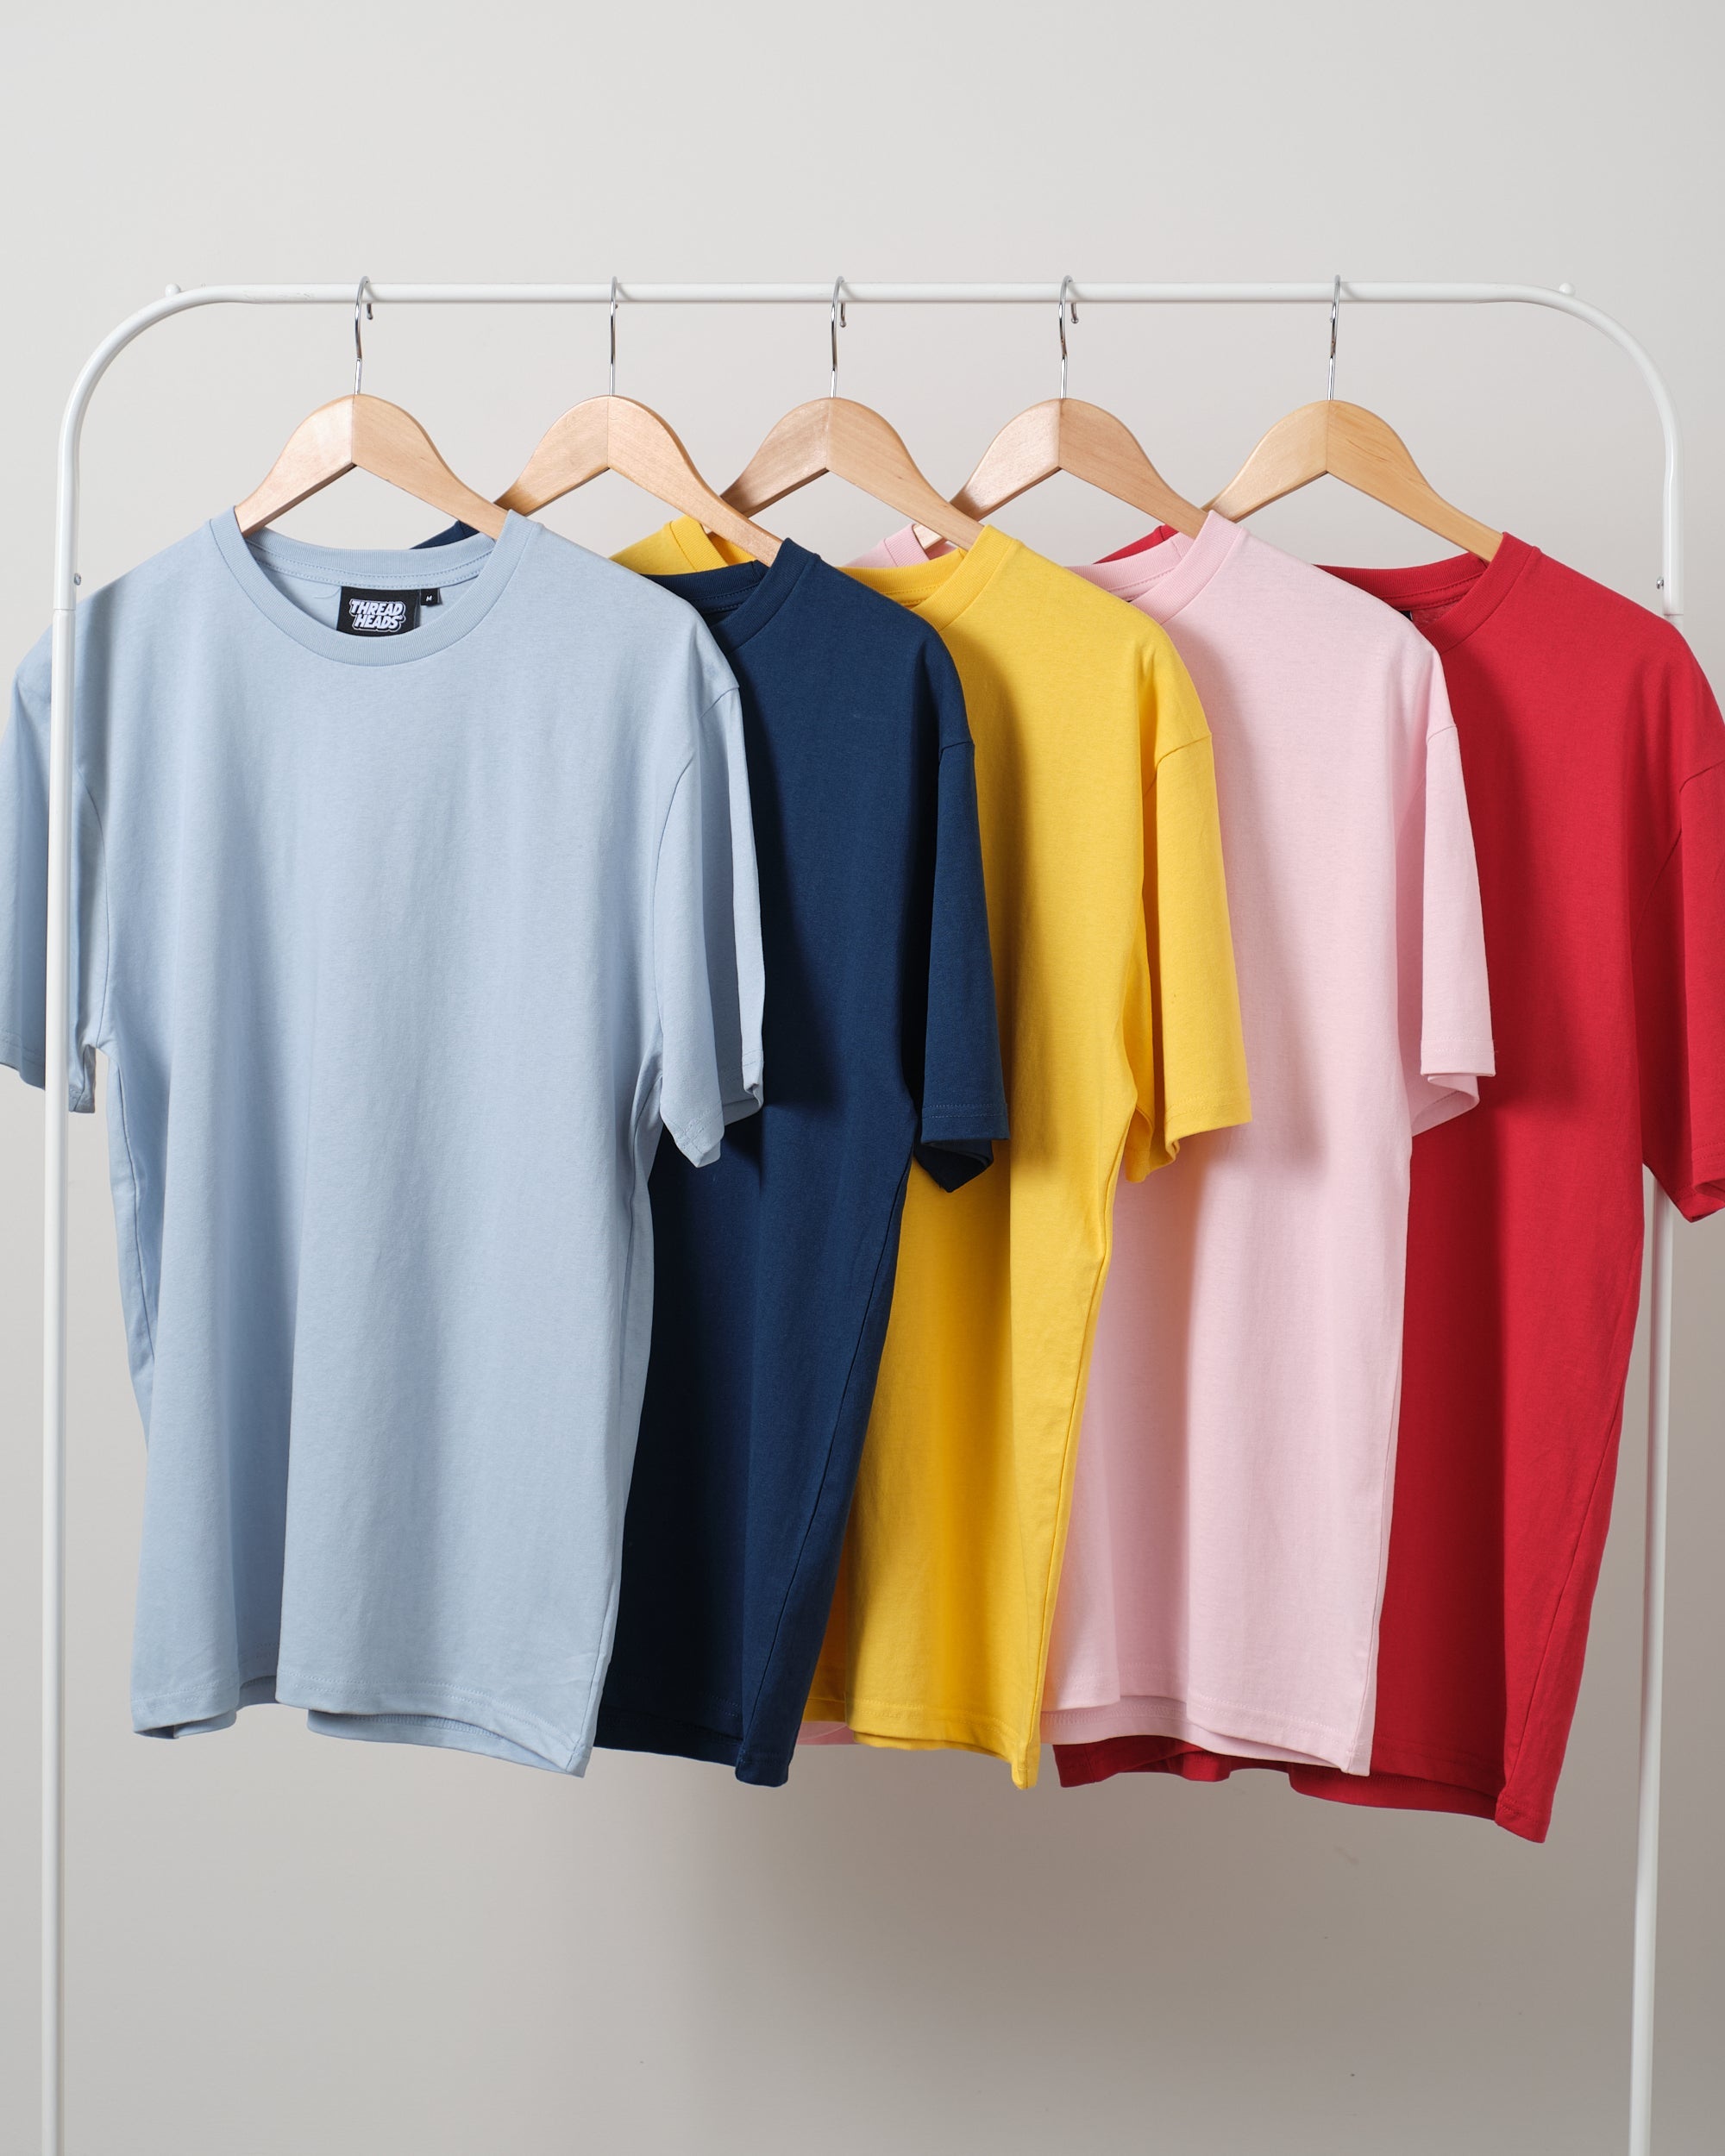 Classic Tee 5 Pack: Pale Blue, Navy, Yellow, Pink, Red  Australia Online 